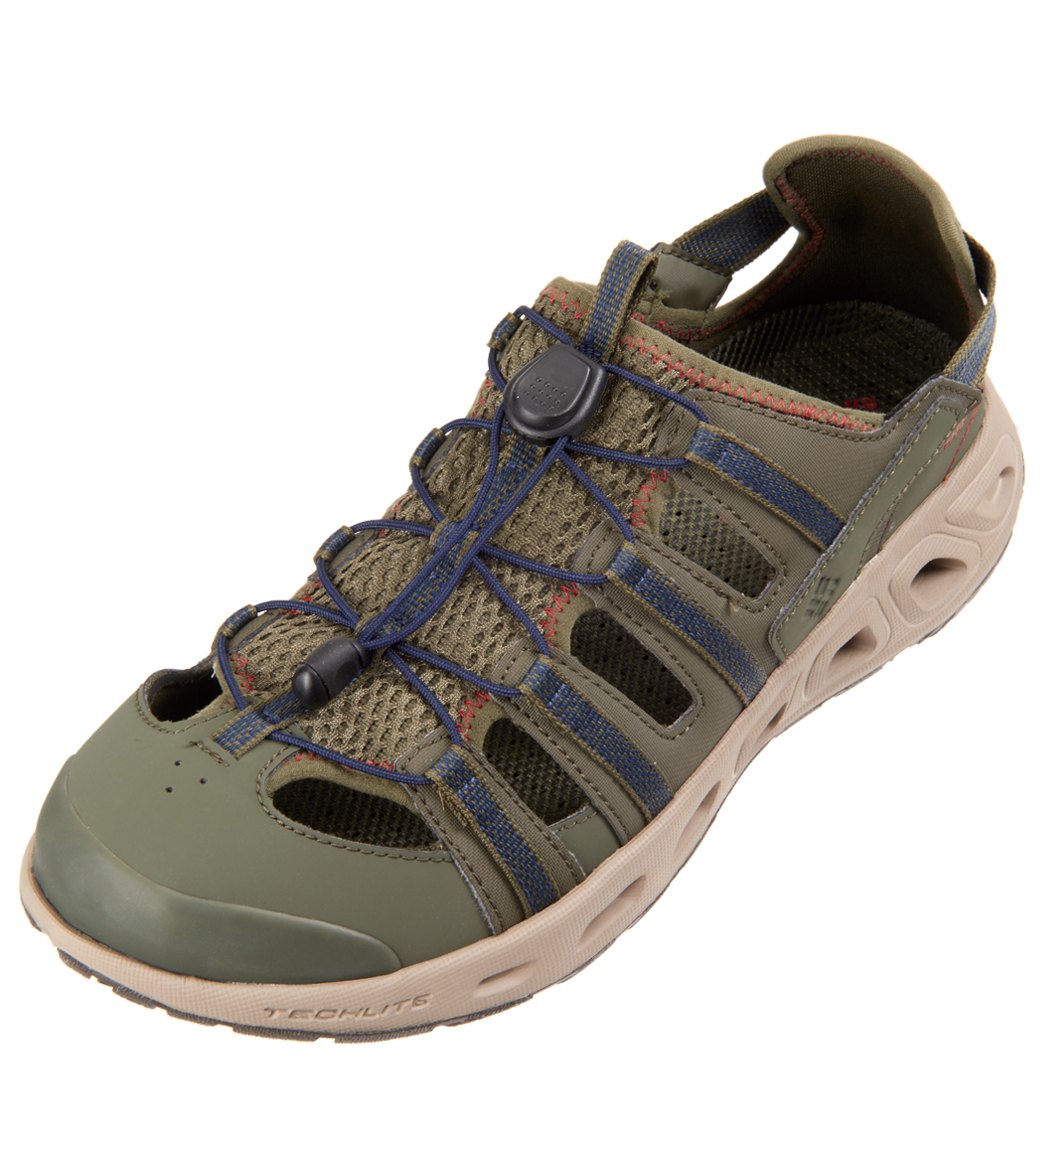 Columbia Men's Supervent II Water Shoes at SwimOutlet.com - Free Shipping